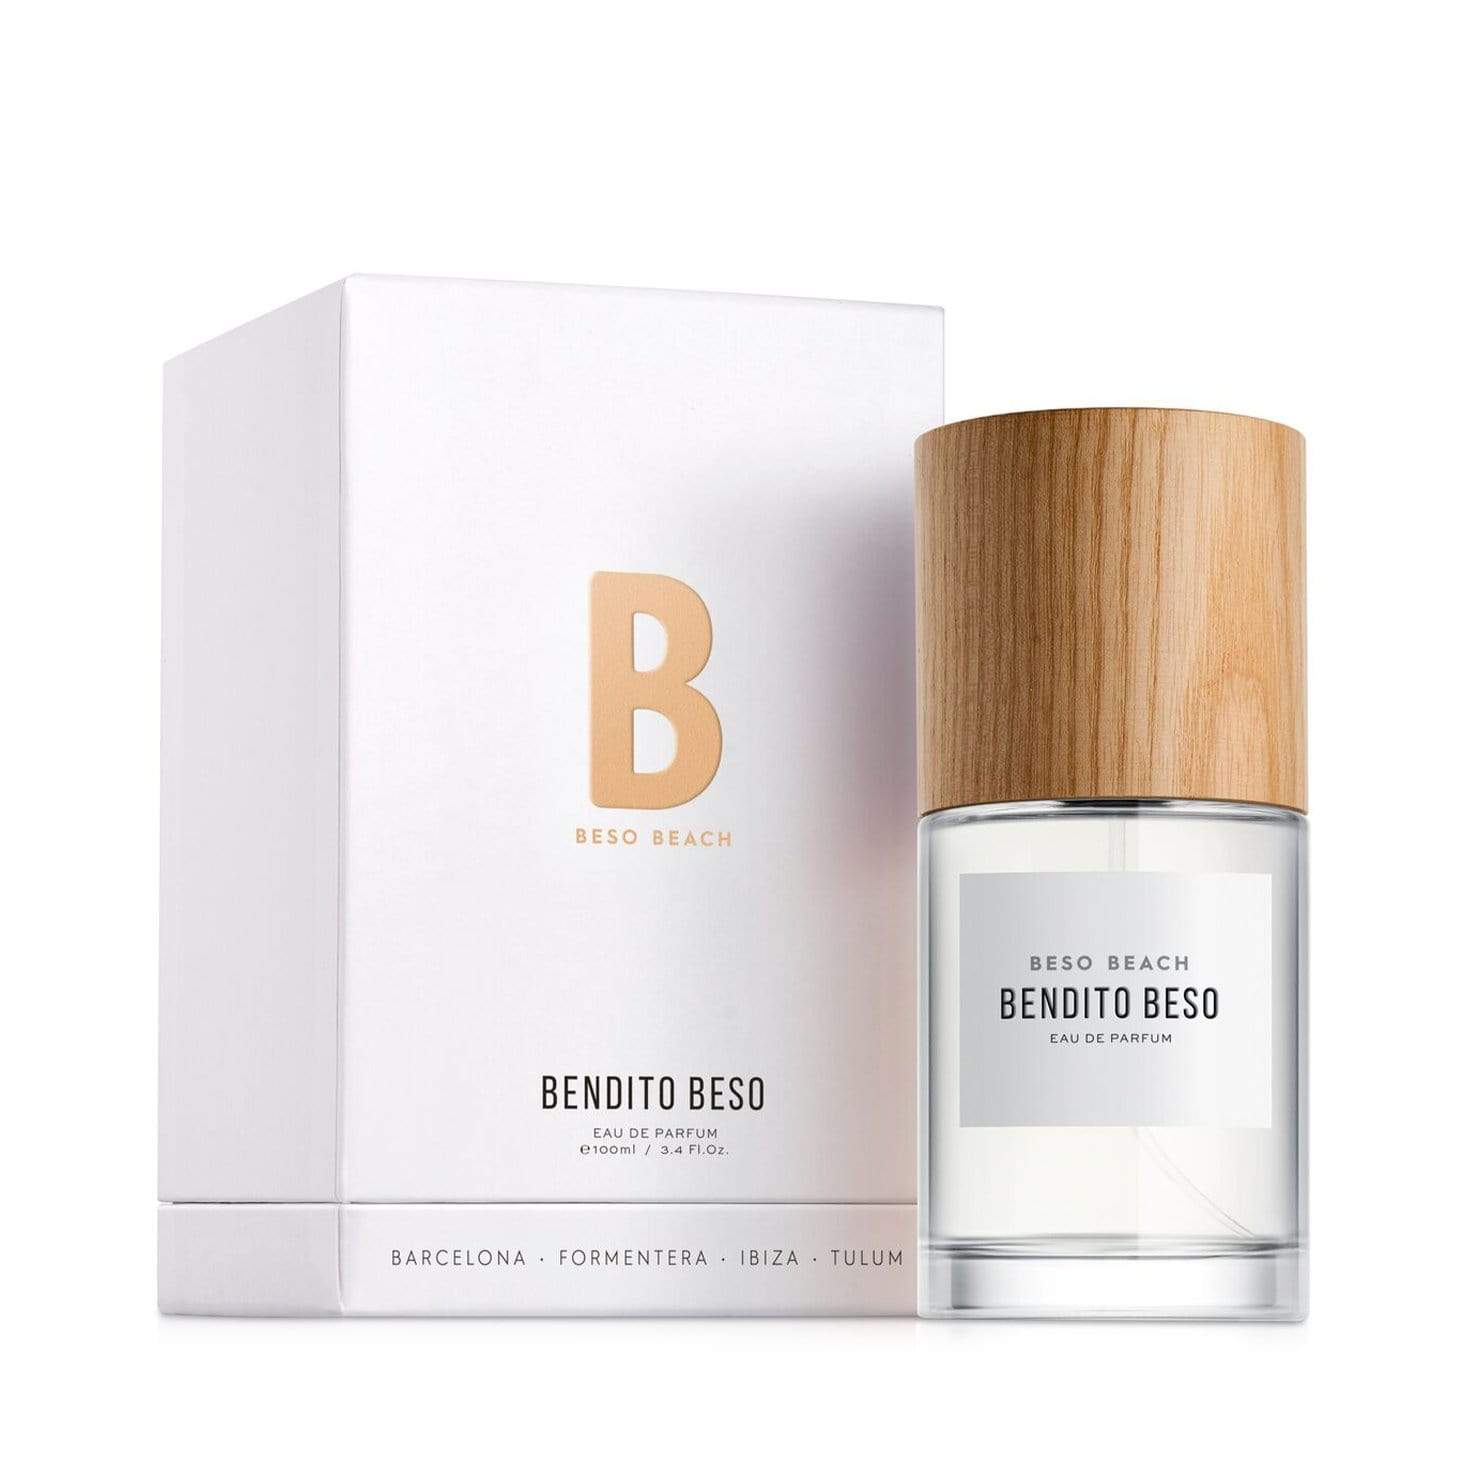 BEON.COM.AU Beso Beach's Bendito Beso Eau de Parfum celebrates an innocent, fresh kiss. Inspired by Formentera, where the scent of the sea, mingles with the evergreen of the Savina forest and the wild bushes. The intense sun rays reflected on the water, the footprints on the sand and the heat of the sun ... Beso Beach at BEON.COM.AU